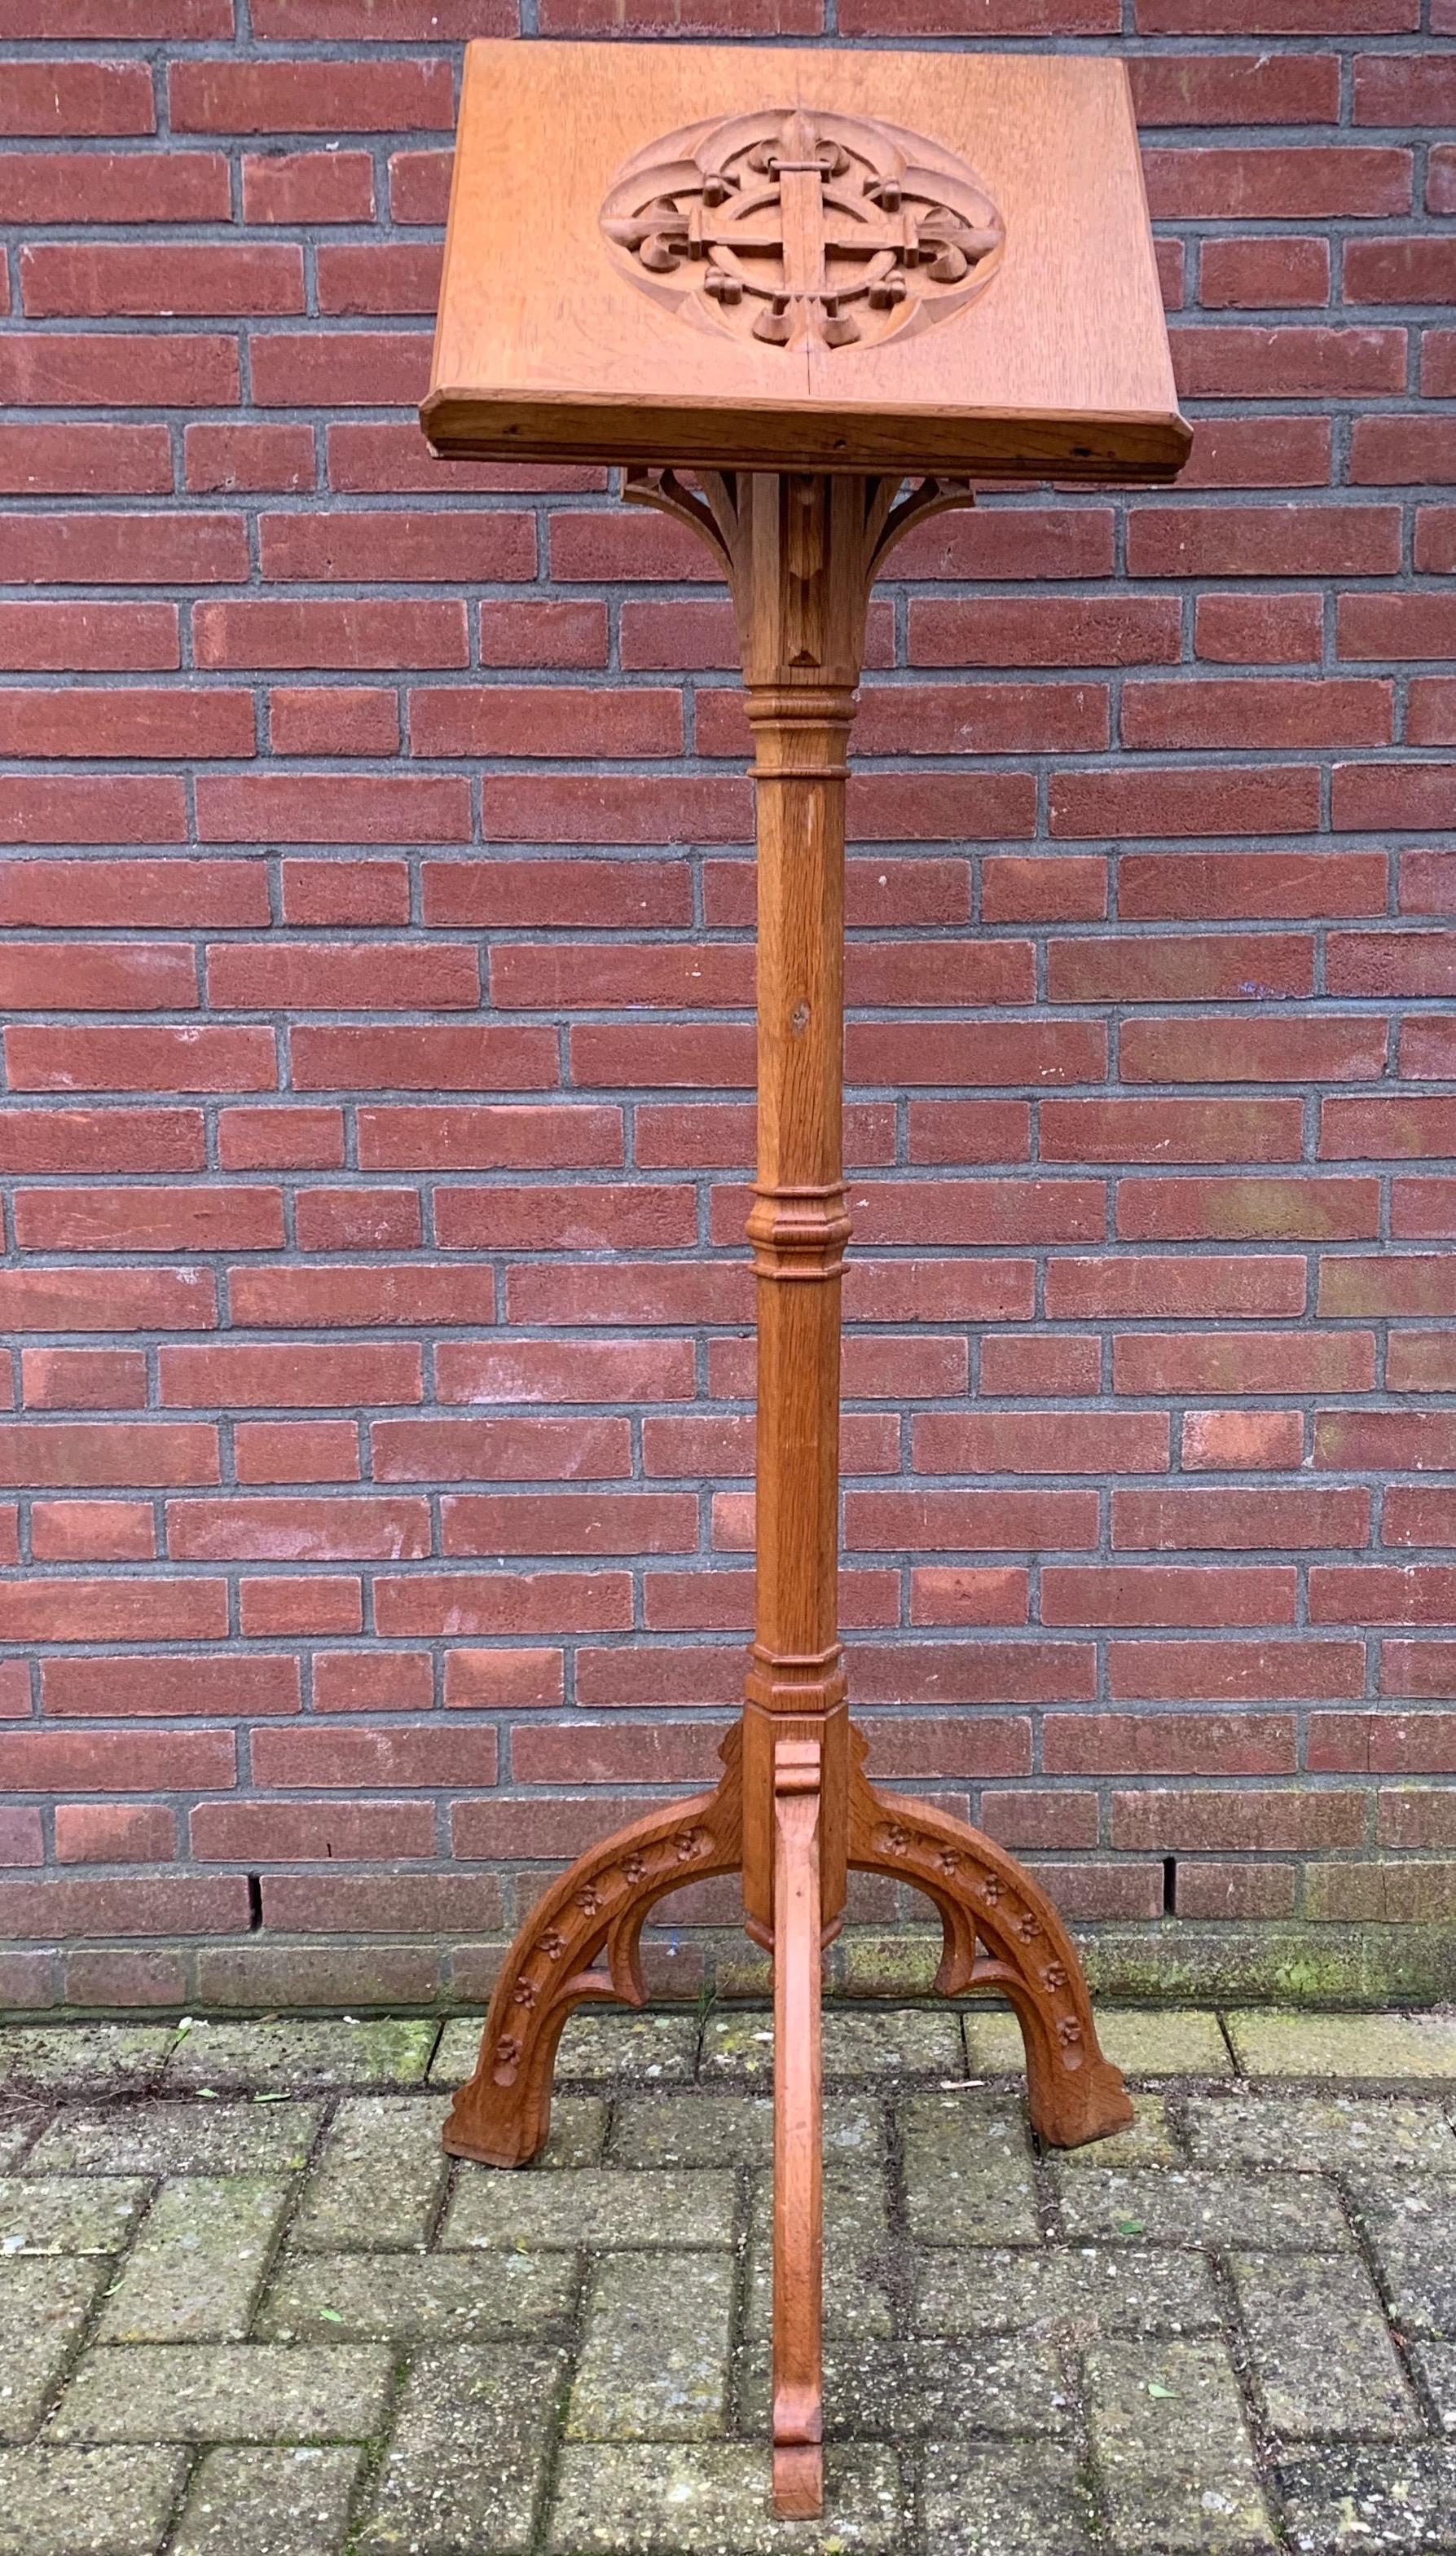 Stunning and one of a kind church lectern / stand for books or sheet music.

This Gothic floor stand from the late 1800s is another perfect example of the quality and beauty of the handcrafted items from that era. With the perfectly symmetrical